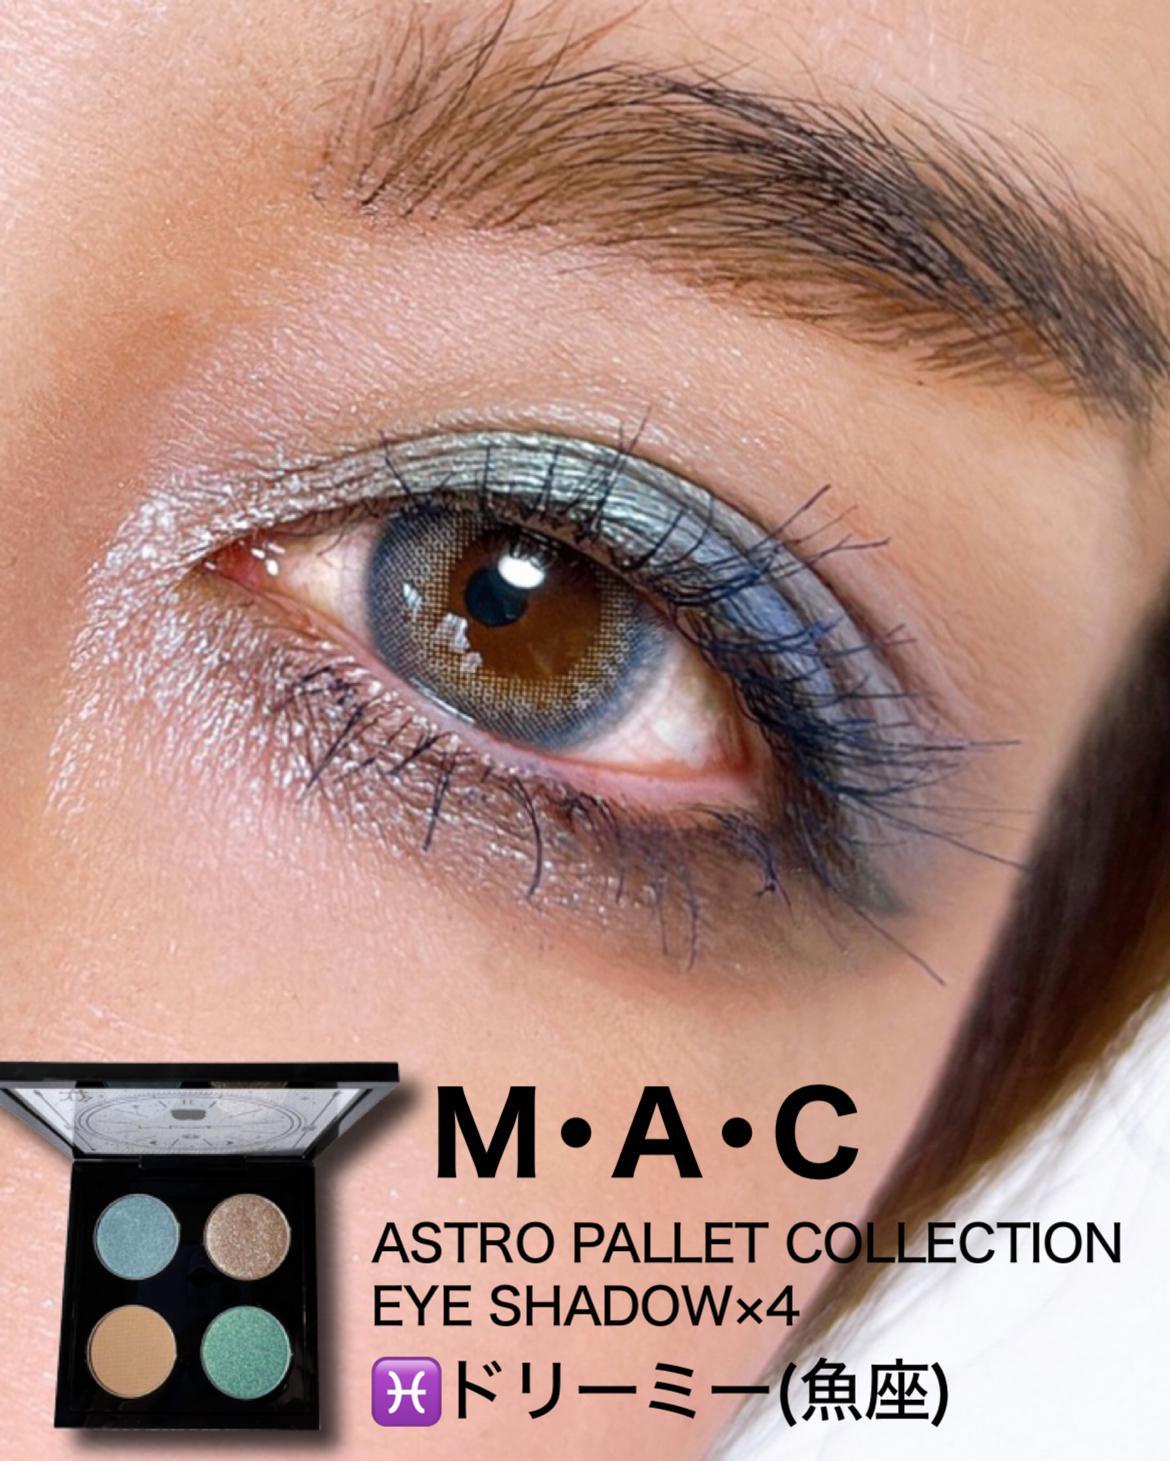 MACのASTRO PALETTE【魚座】で神秘的な寒色メイク♪ | 踊るさるさんの